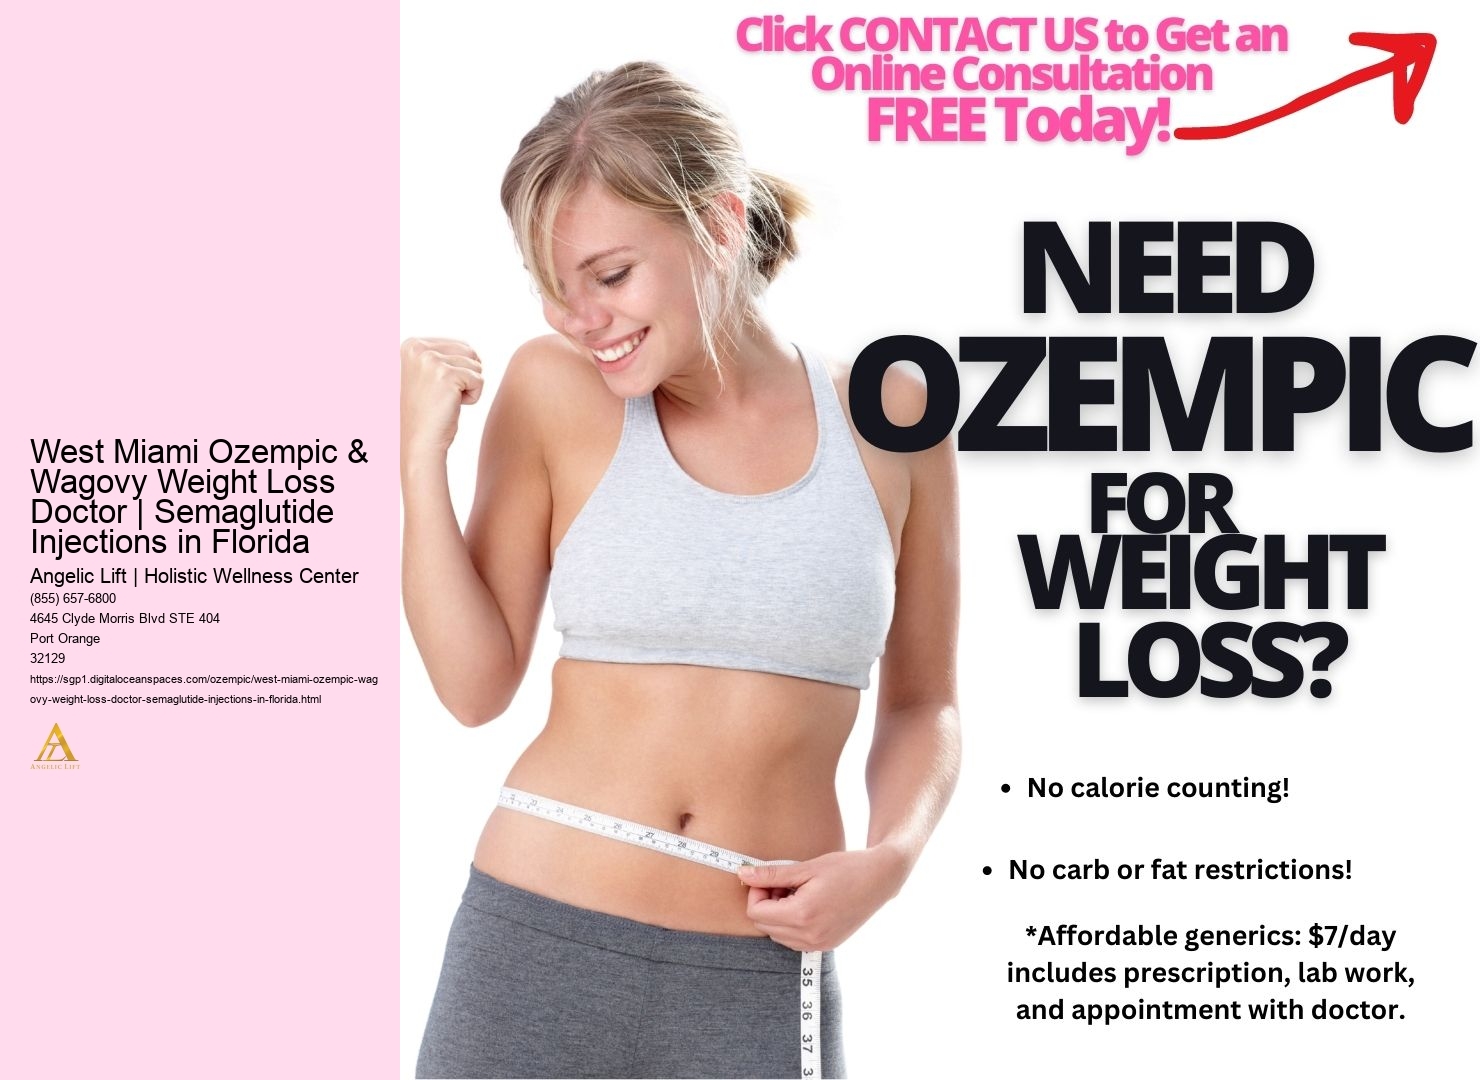 West Miami Ozempic & Wagovy Weight Loss Doctor | Semaglutide Injections in Florida